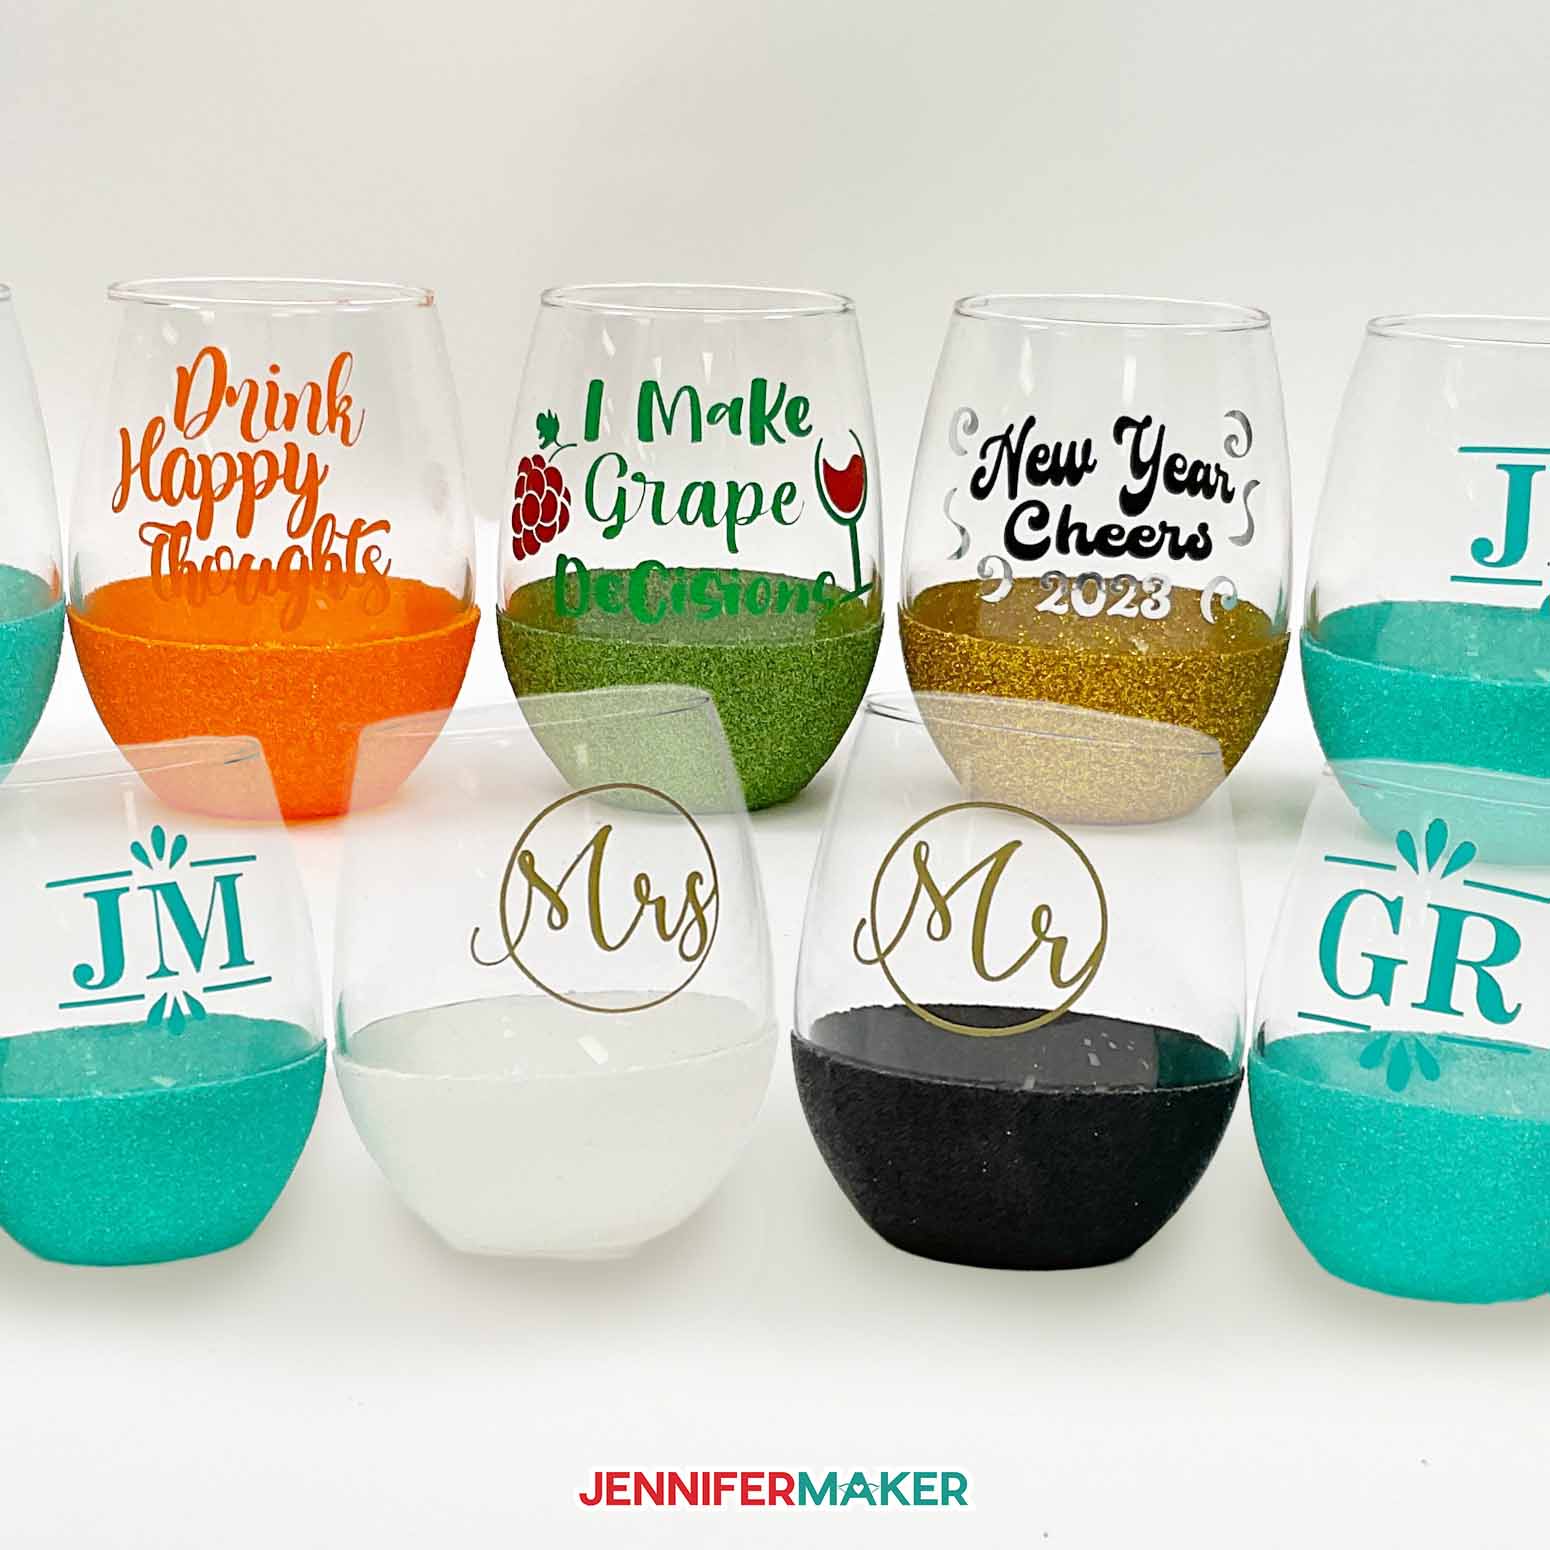 Several stemless glass wine glasses with glitter bottoms and vinyl decals from a tutorial on how to glitter wine glasses.